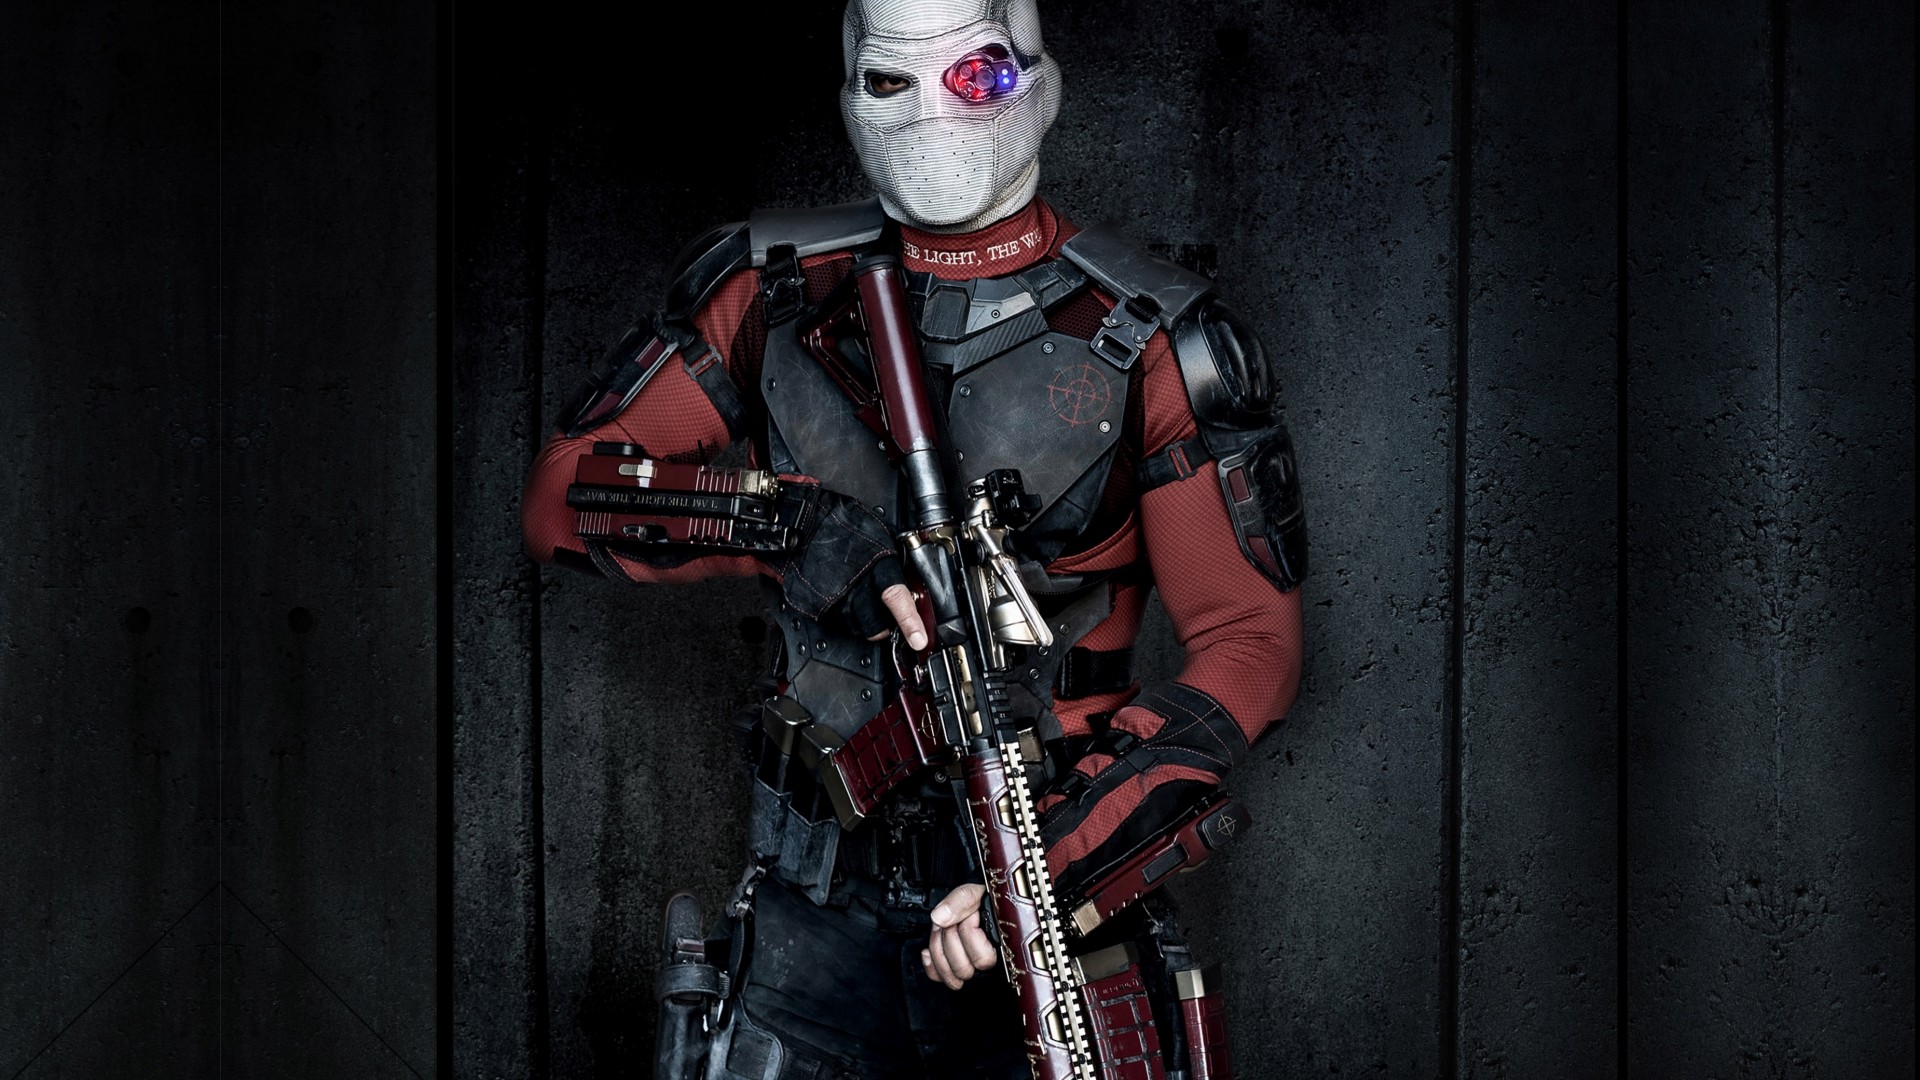 Wallpaper Deadshot Suicide Squad Will Smith Mask Movies